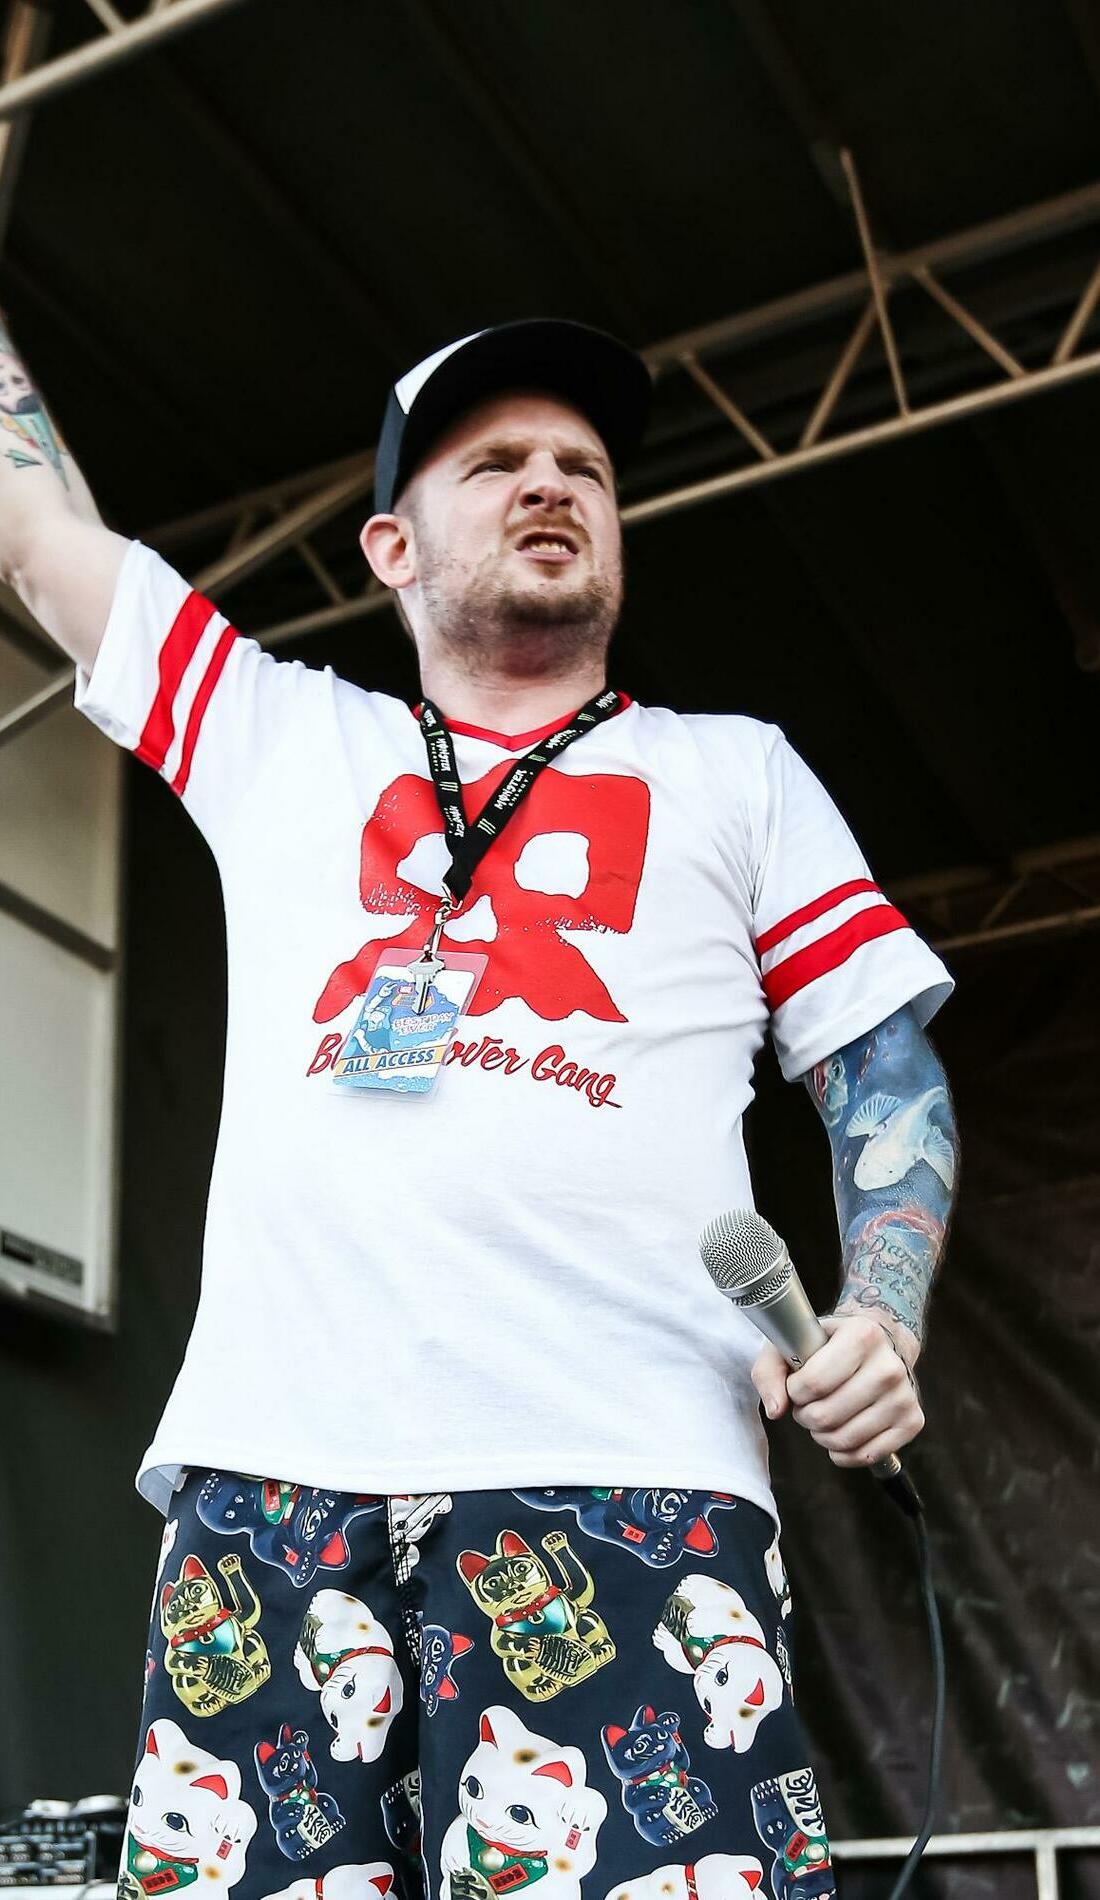 A Mac Lethal live event